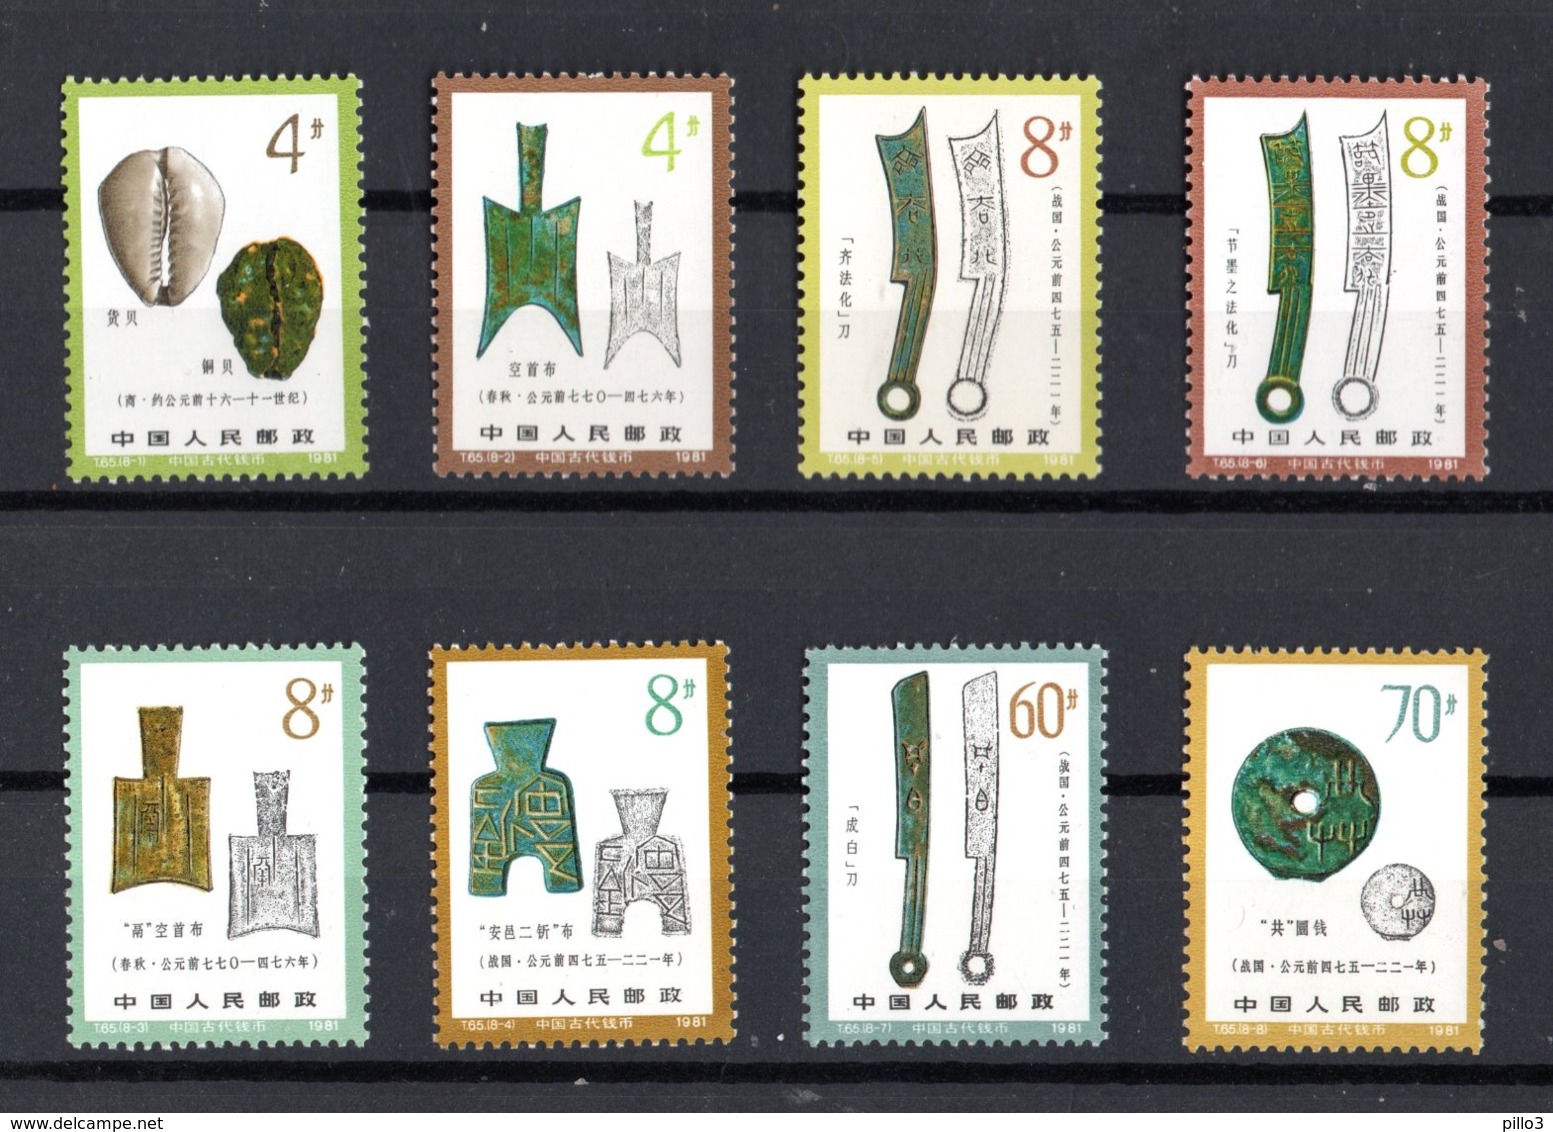 PRC CHINA: Ancient Coins Of China (1st Set) 8val.MNH**  Michel  N° 1758/65   Del  29.10.1981 - Nuovi